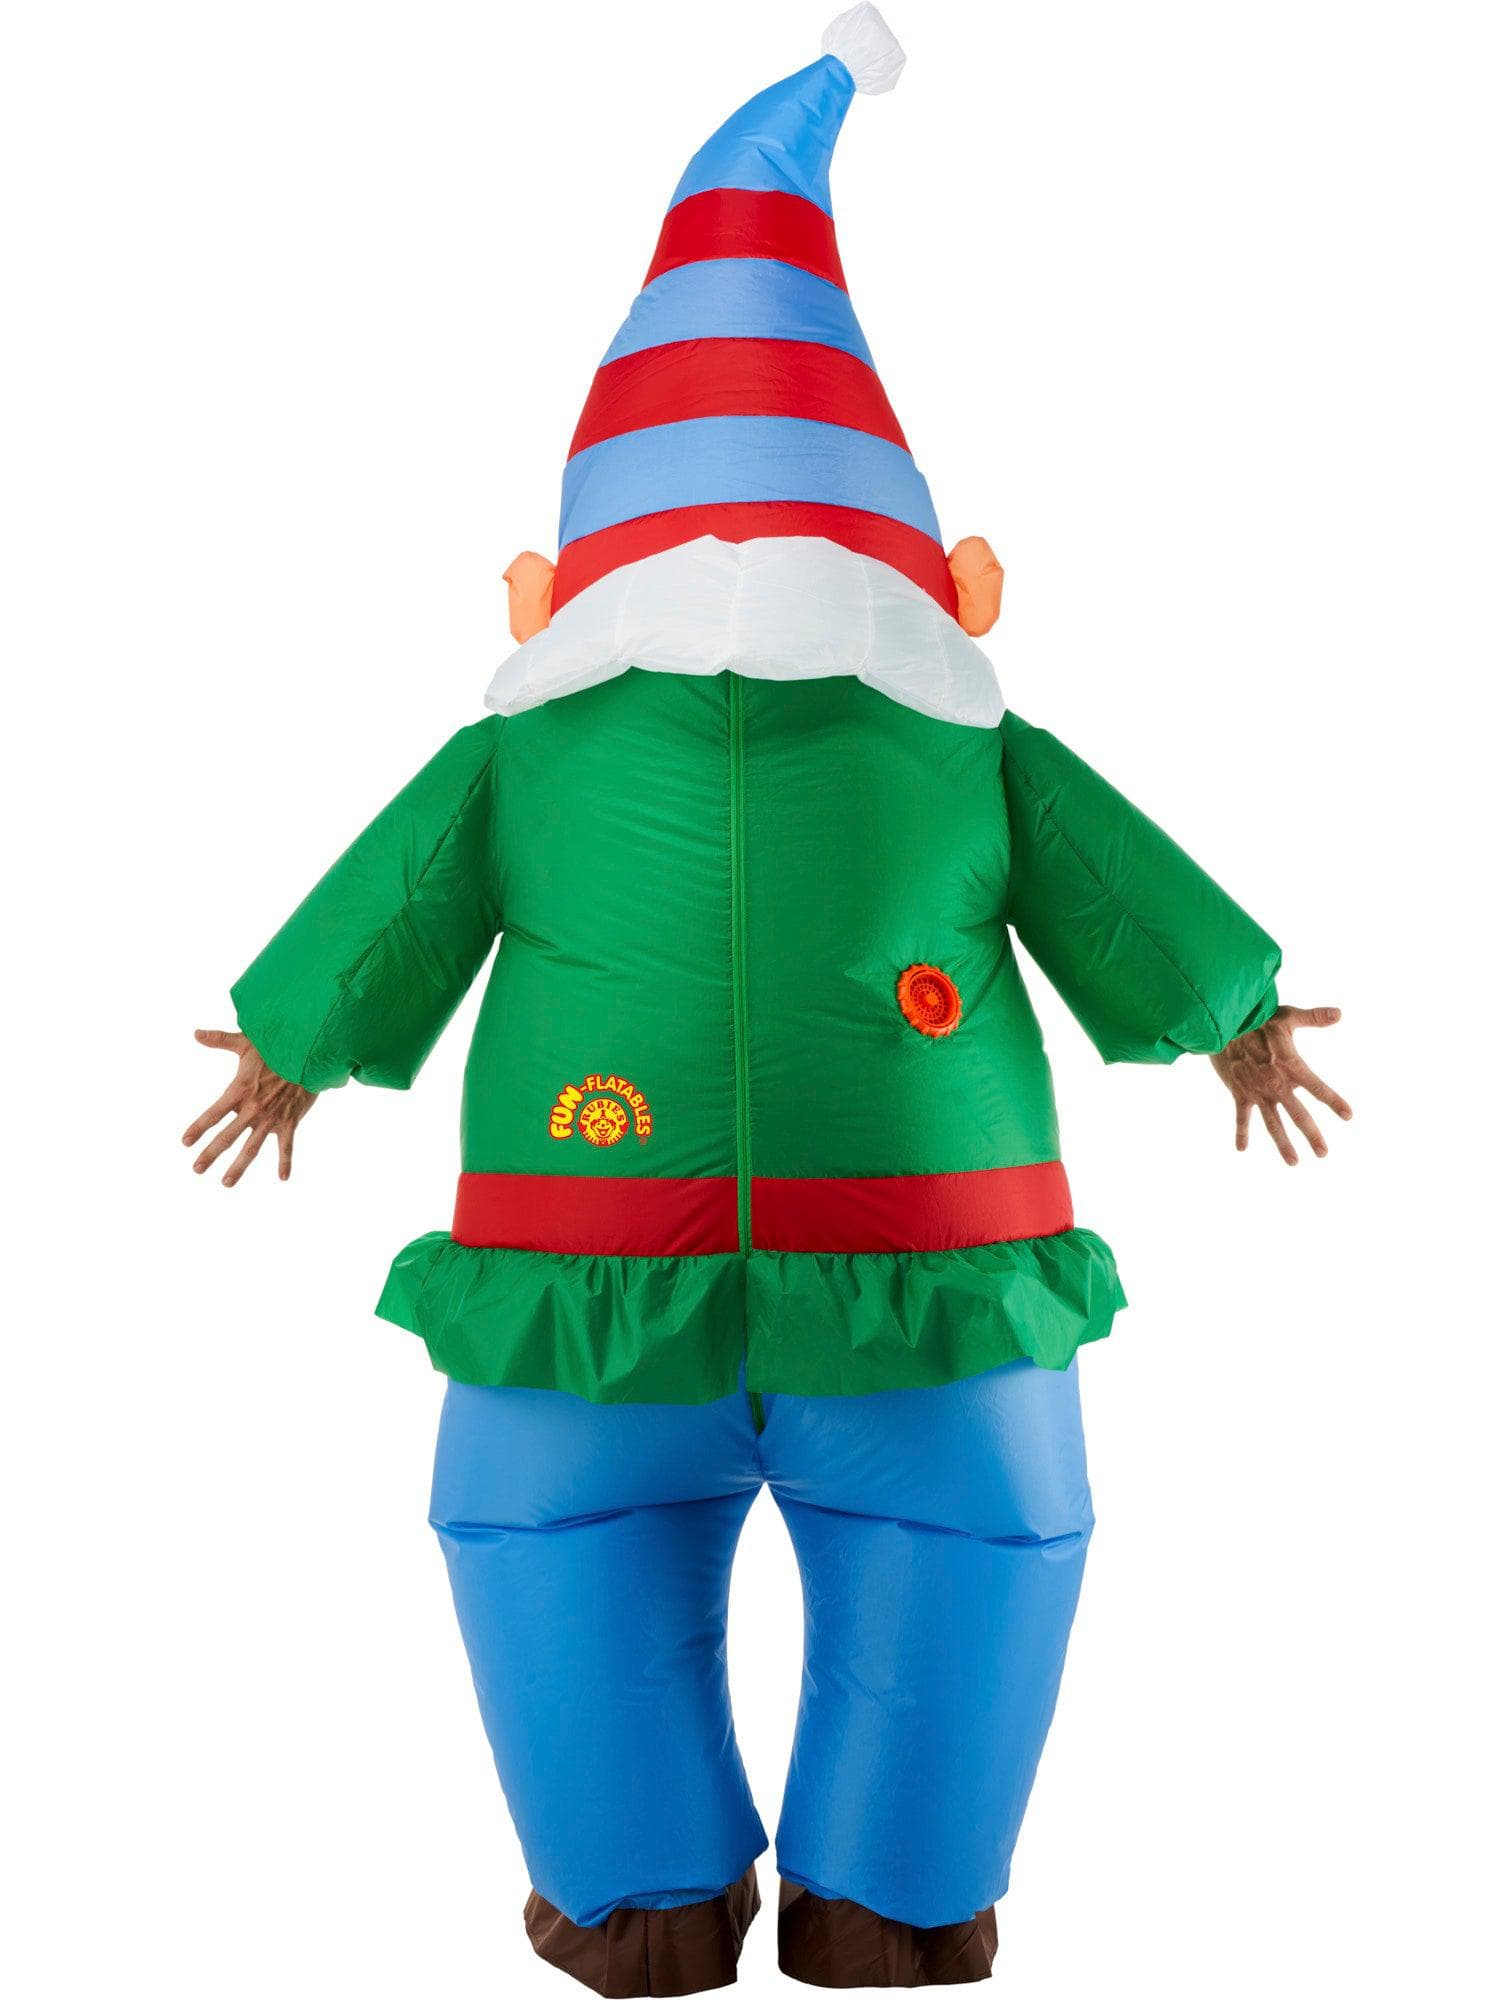 Adult Garden Gnome Inflatable Costume - costumes.com